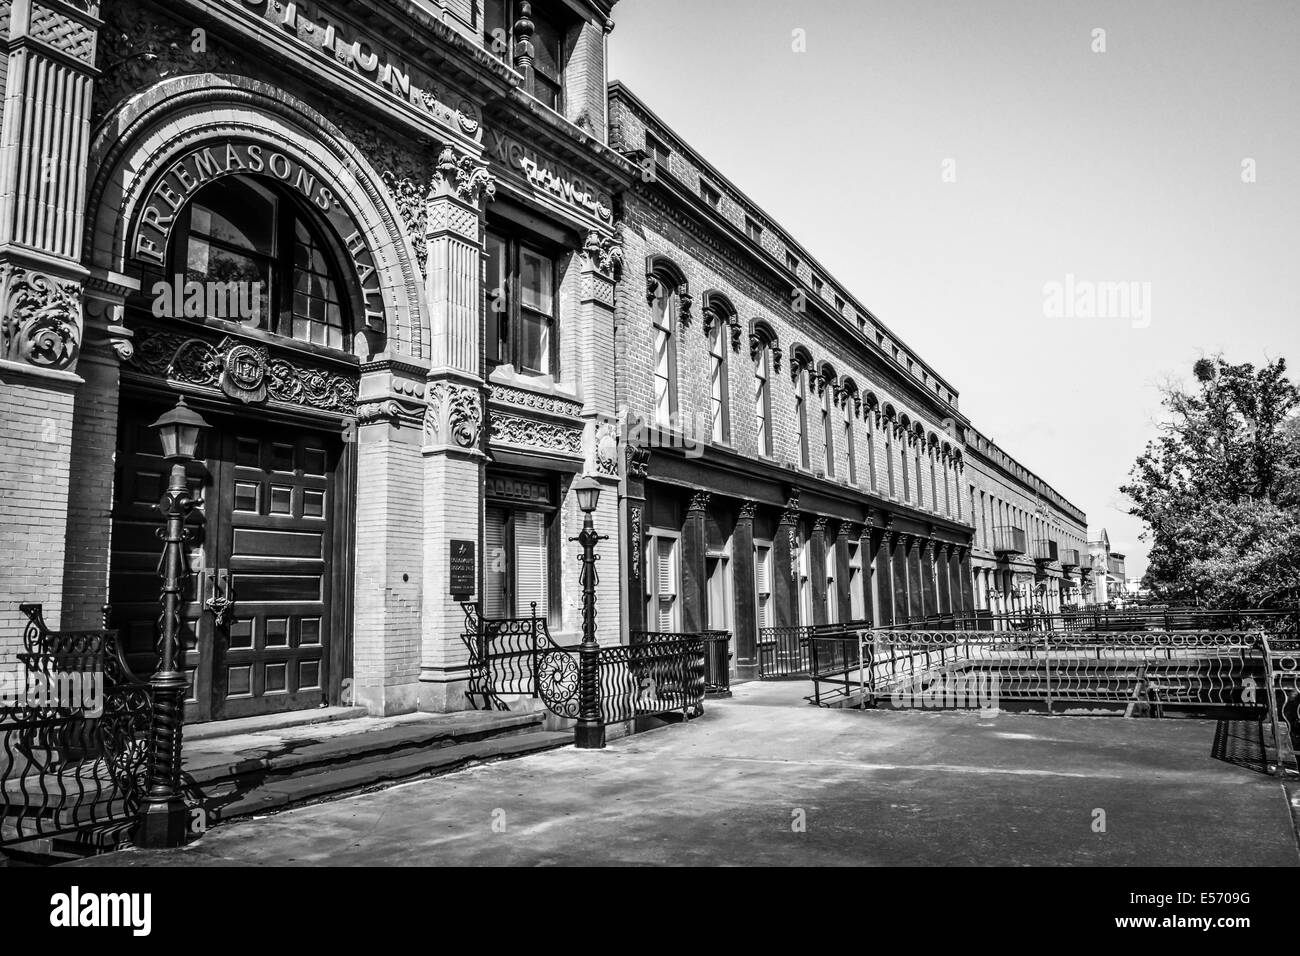 The architecturally significant Old Savannah Cotton Exchange building in Savannah, GA, USA Stock Photo